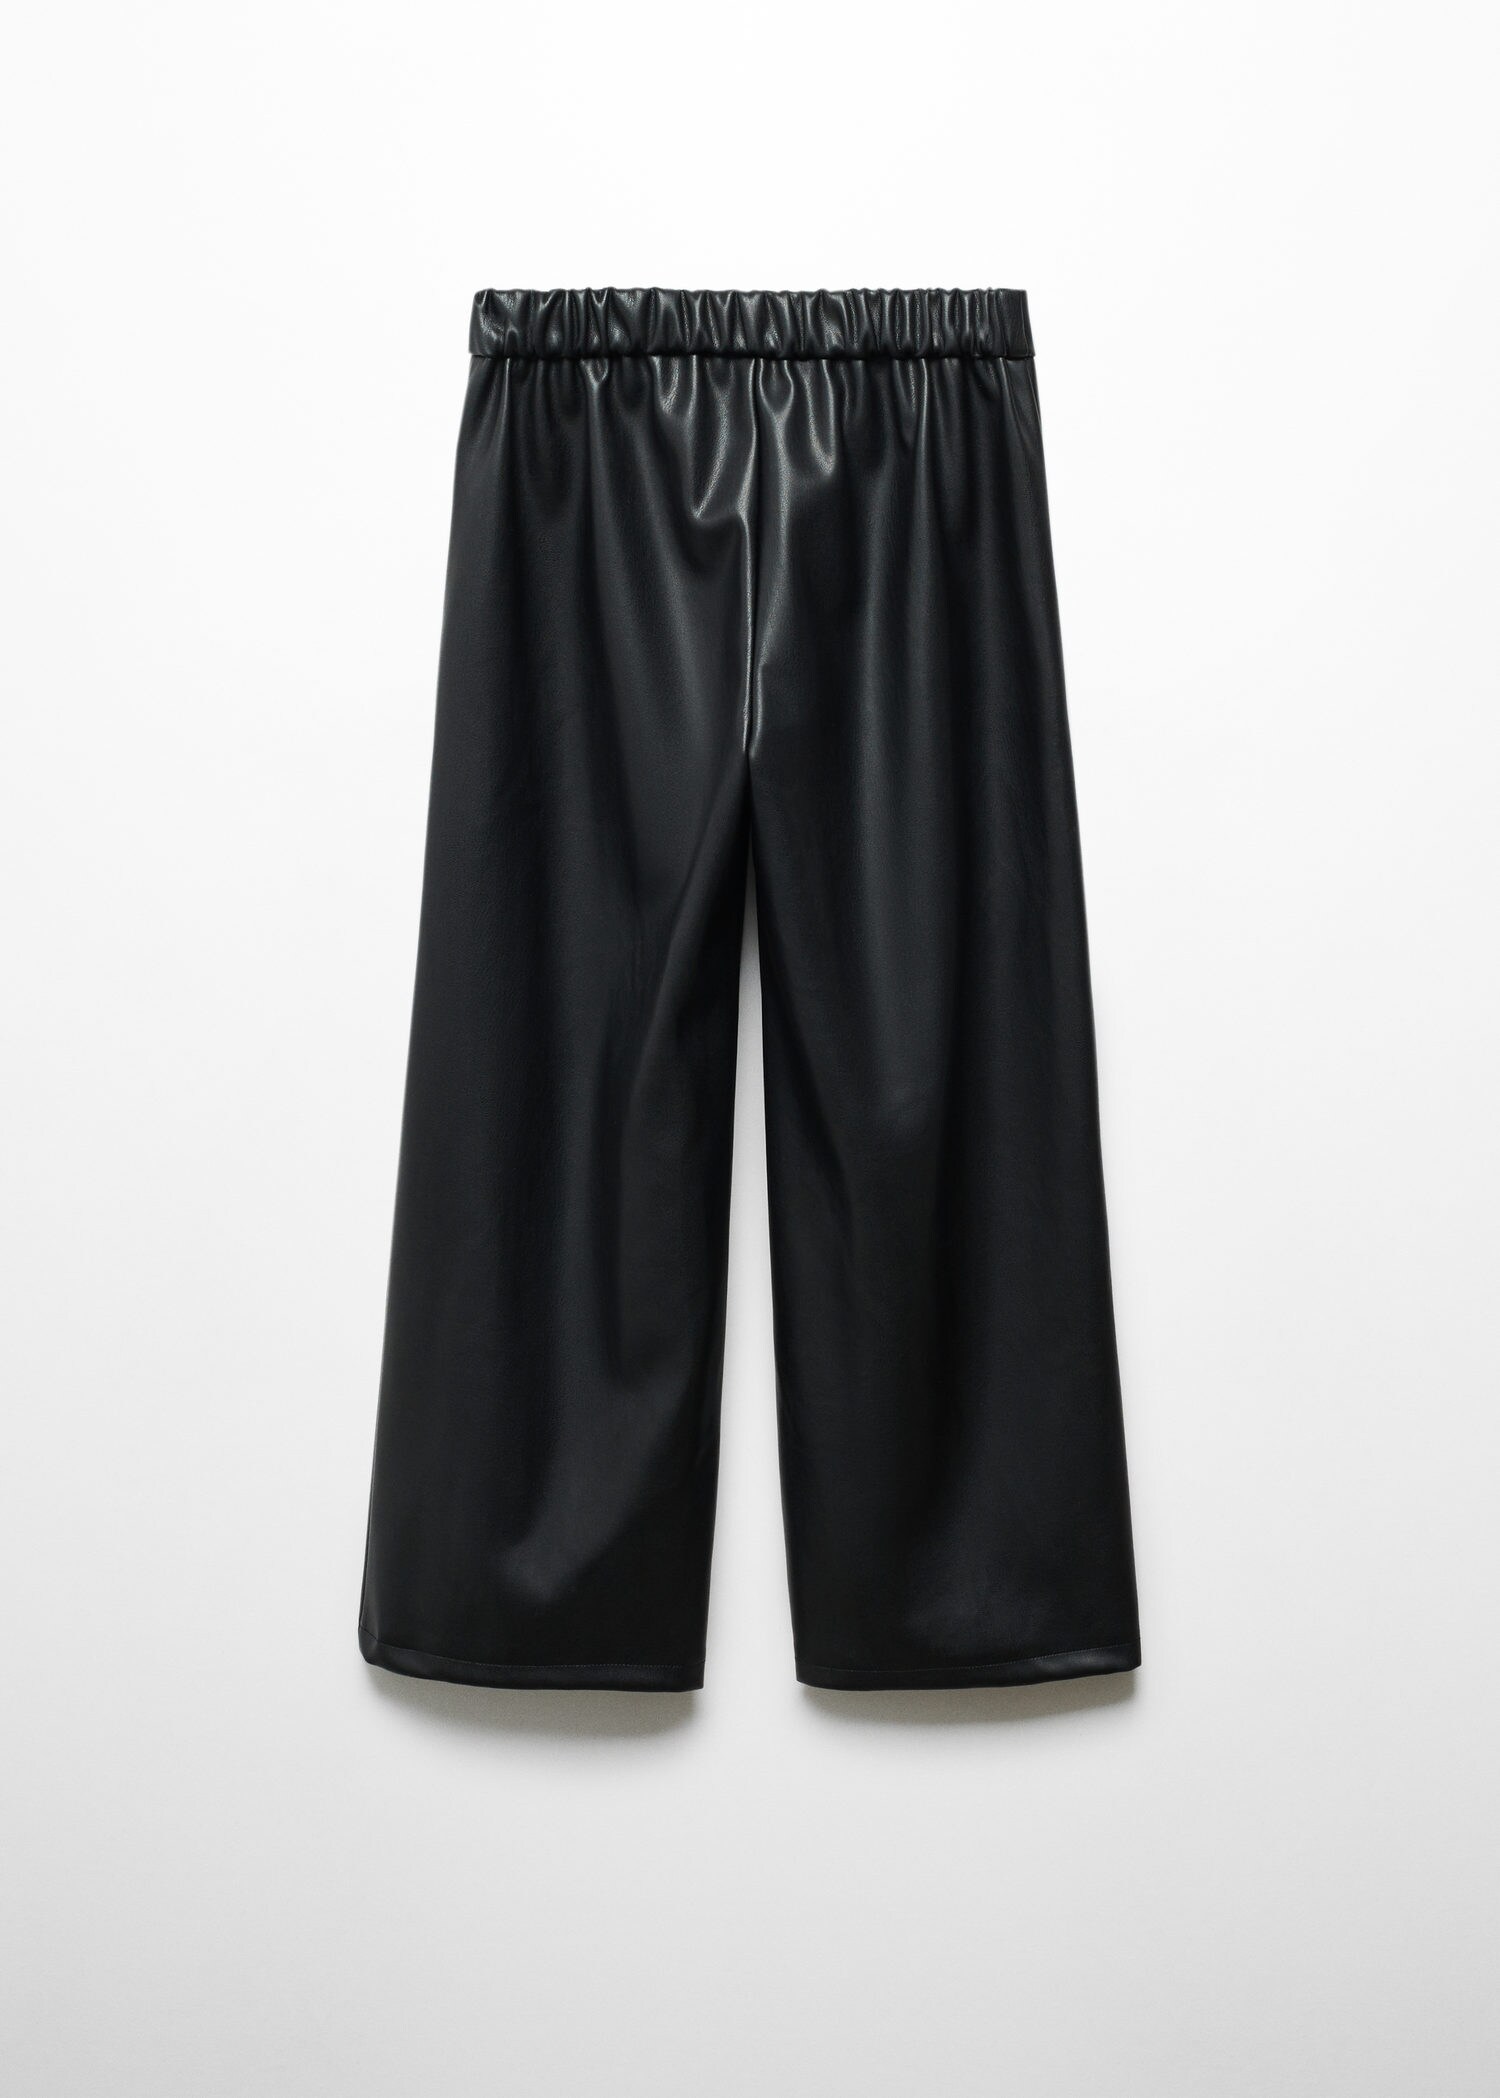 Faux-leather trousers | MANGO